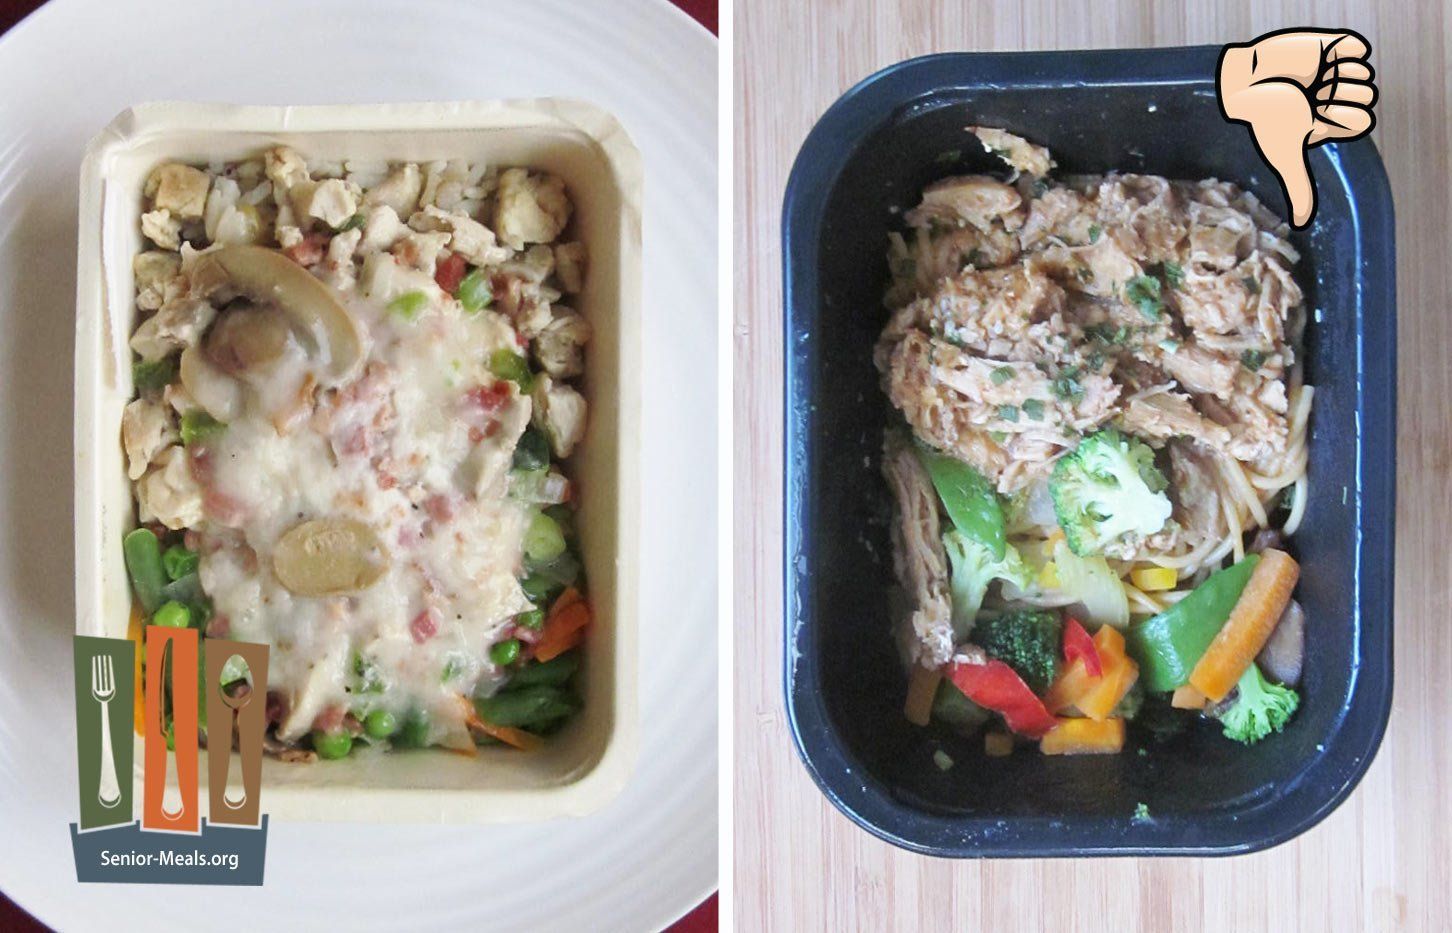 Tray Packaging Before and After. Unchanged. Still No Divided Trays. You Whole Meal is Lumped Together.